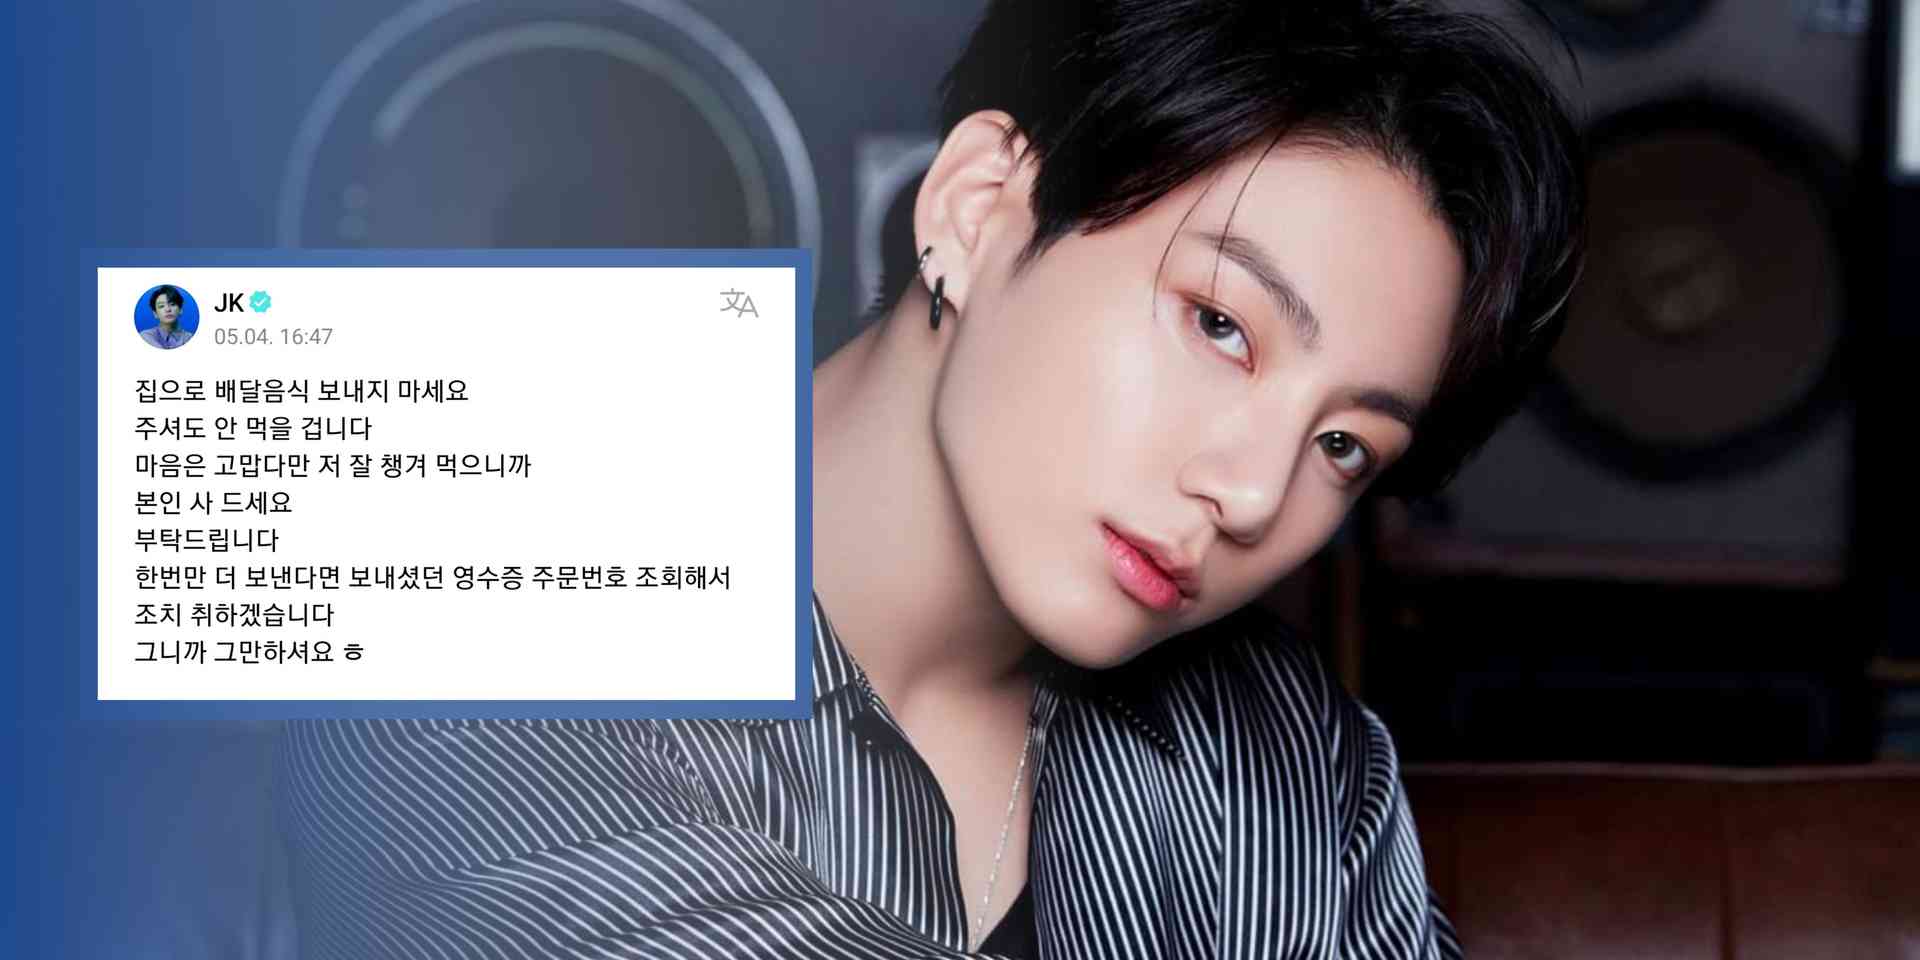 BTS' Jungkook pleads fans to respect his privacy, stop sending food